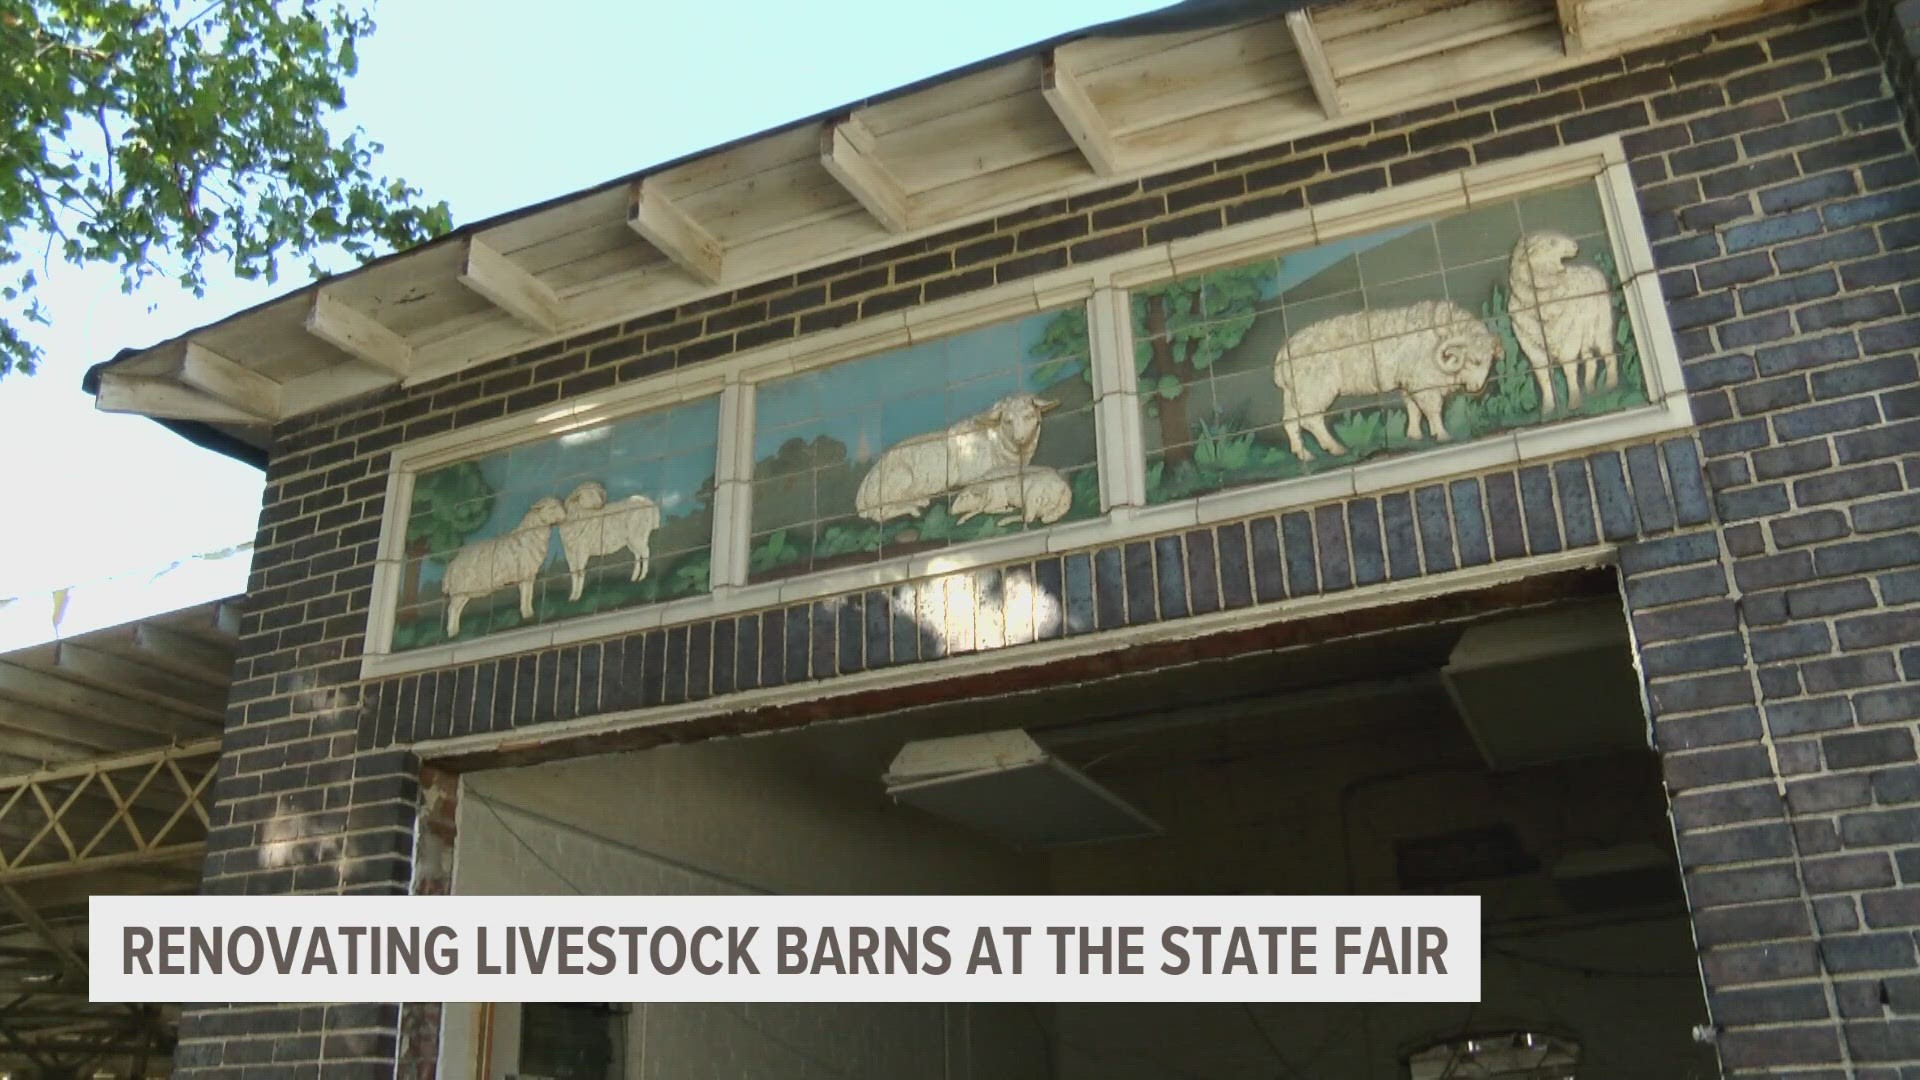 The Iowa State Fair will renovate all of its livestock barns over the next several years, and will cost a total of $25 million.